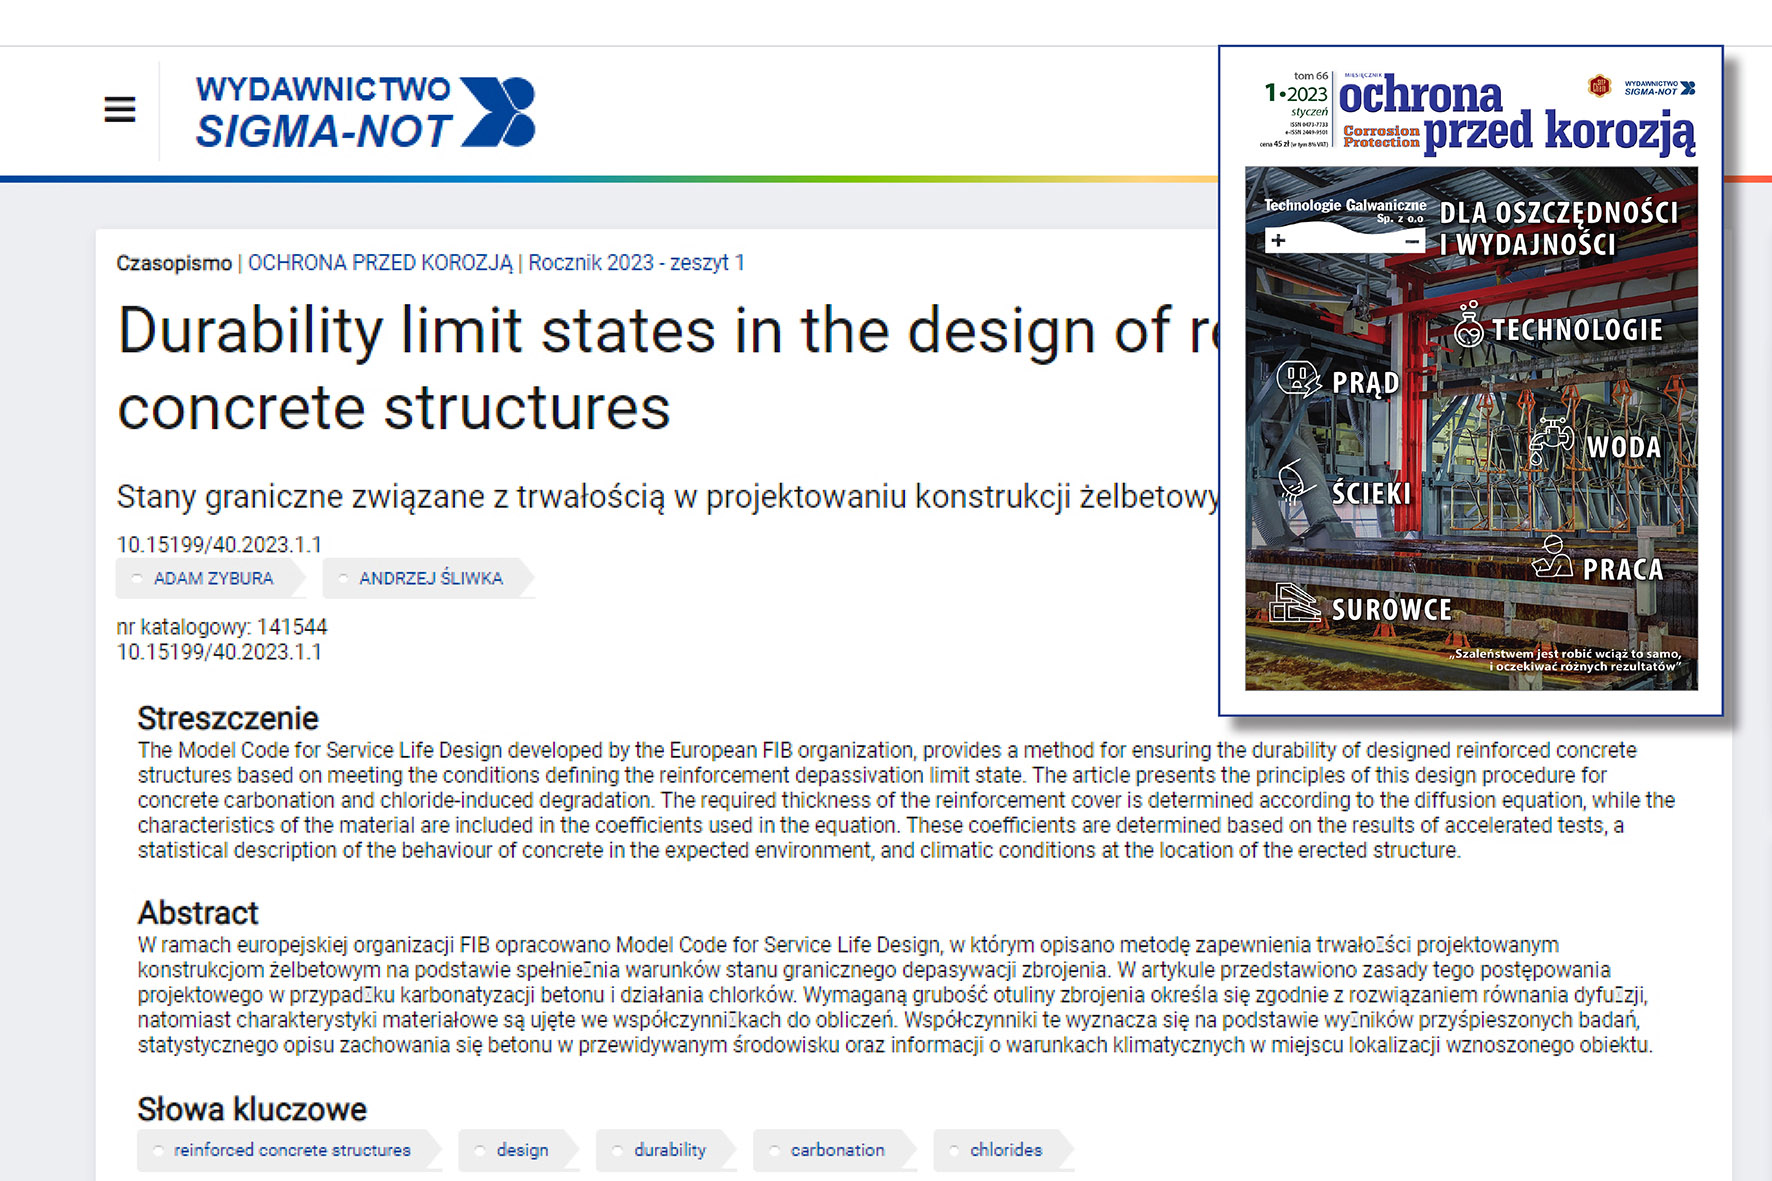 DURABILITY LIMIT STATES IN THE DESIGN OF REINFORCED CONCRETE STRUCTURES